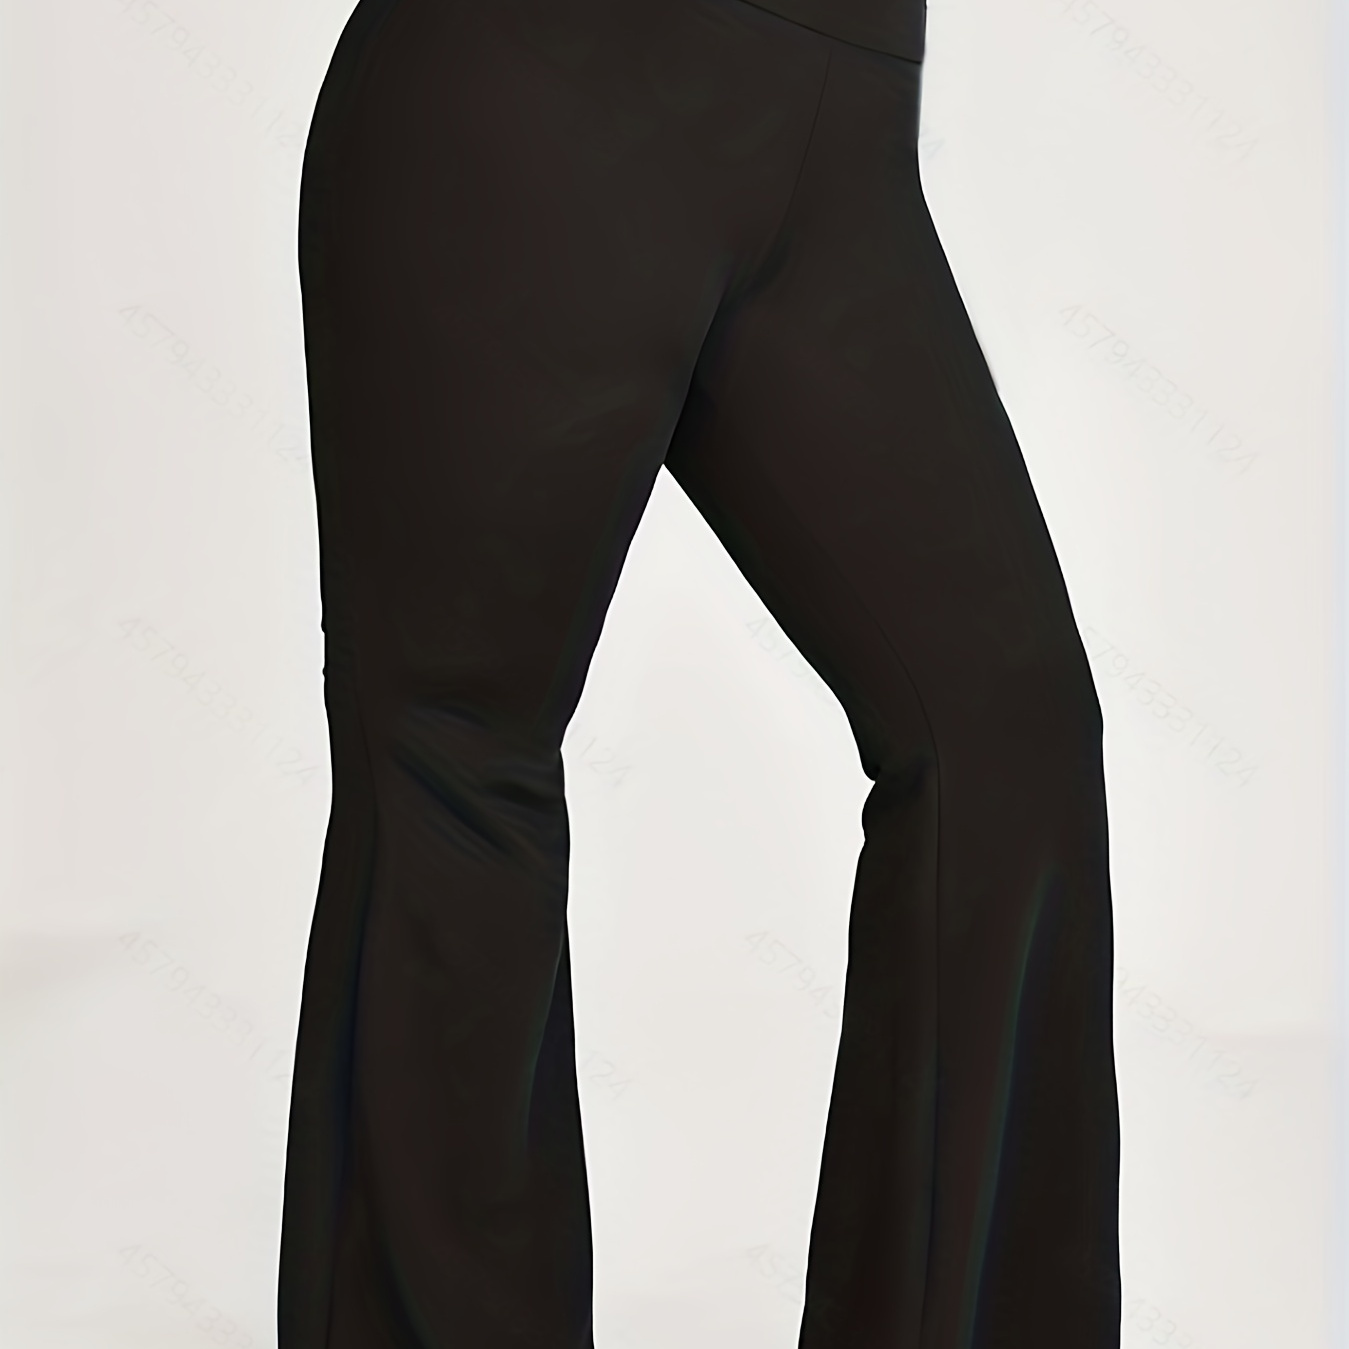 Plus Size Elegant Pants, Women's Plus Solid High Waisted High Stretch Comfort Flare Leggings